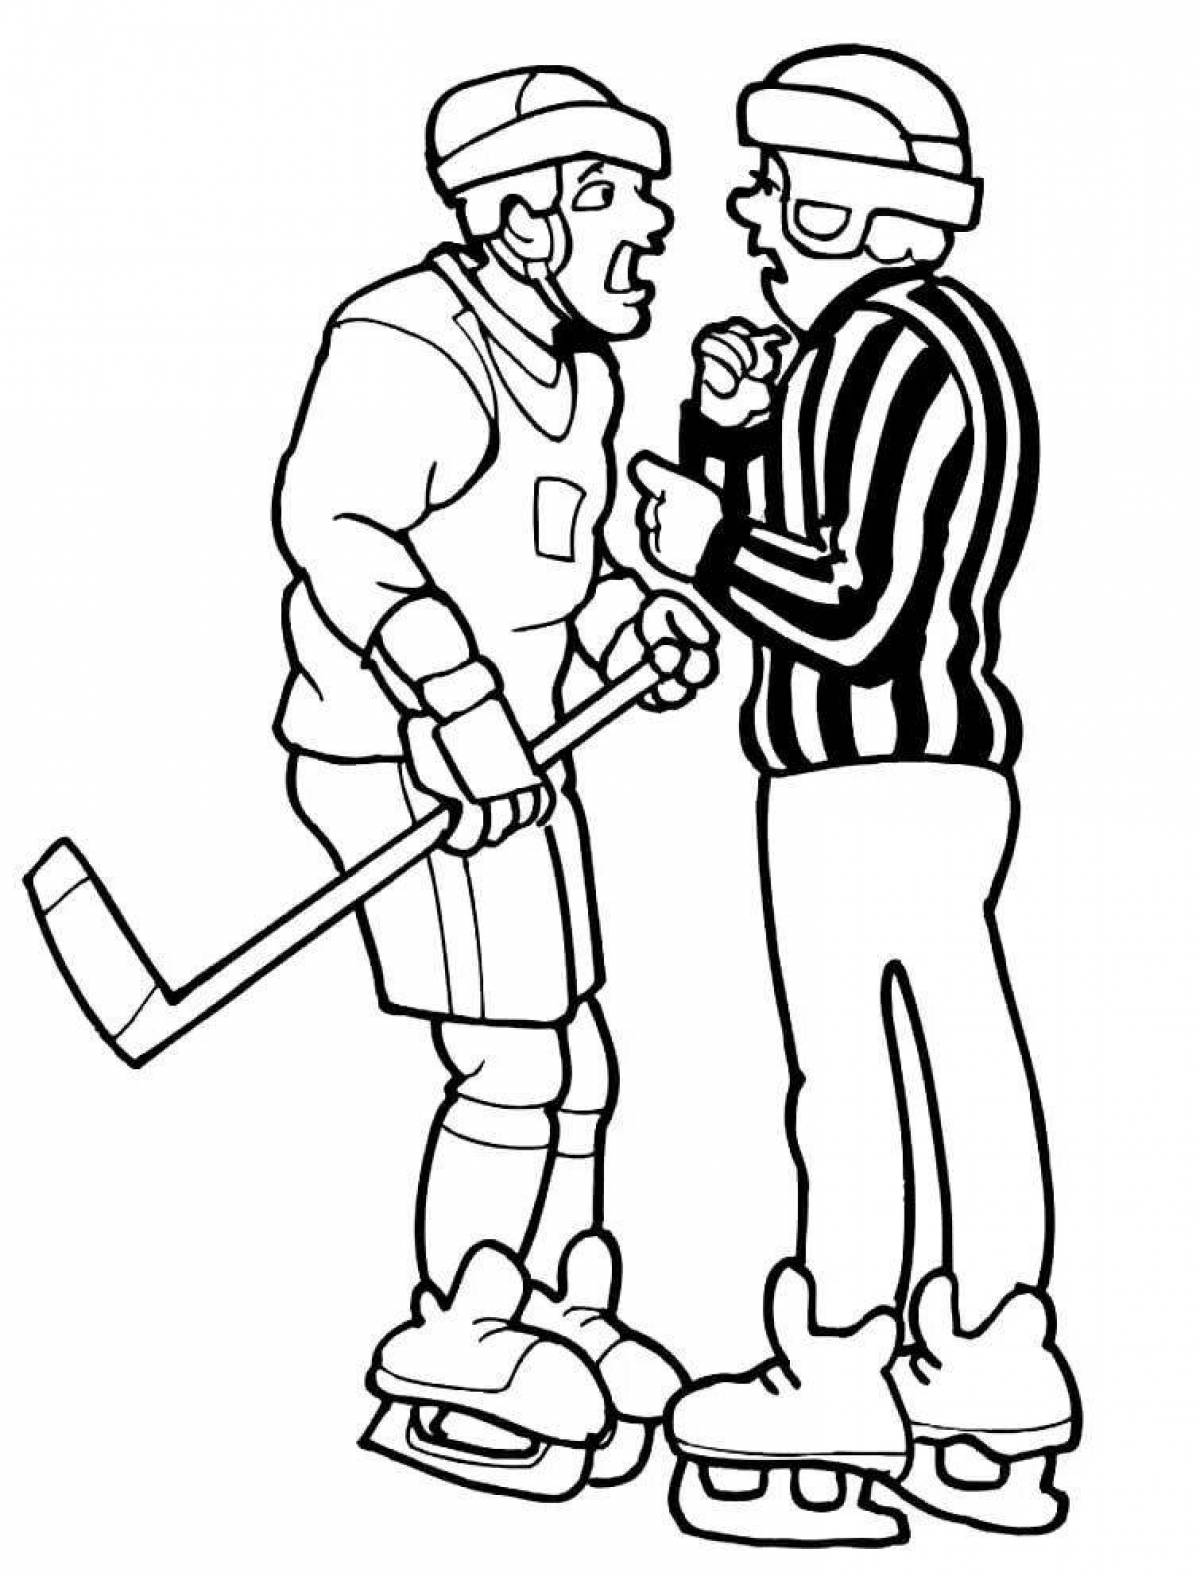 Lovely hockey coloring page